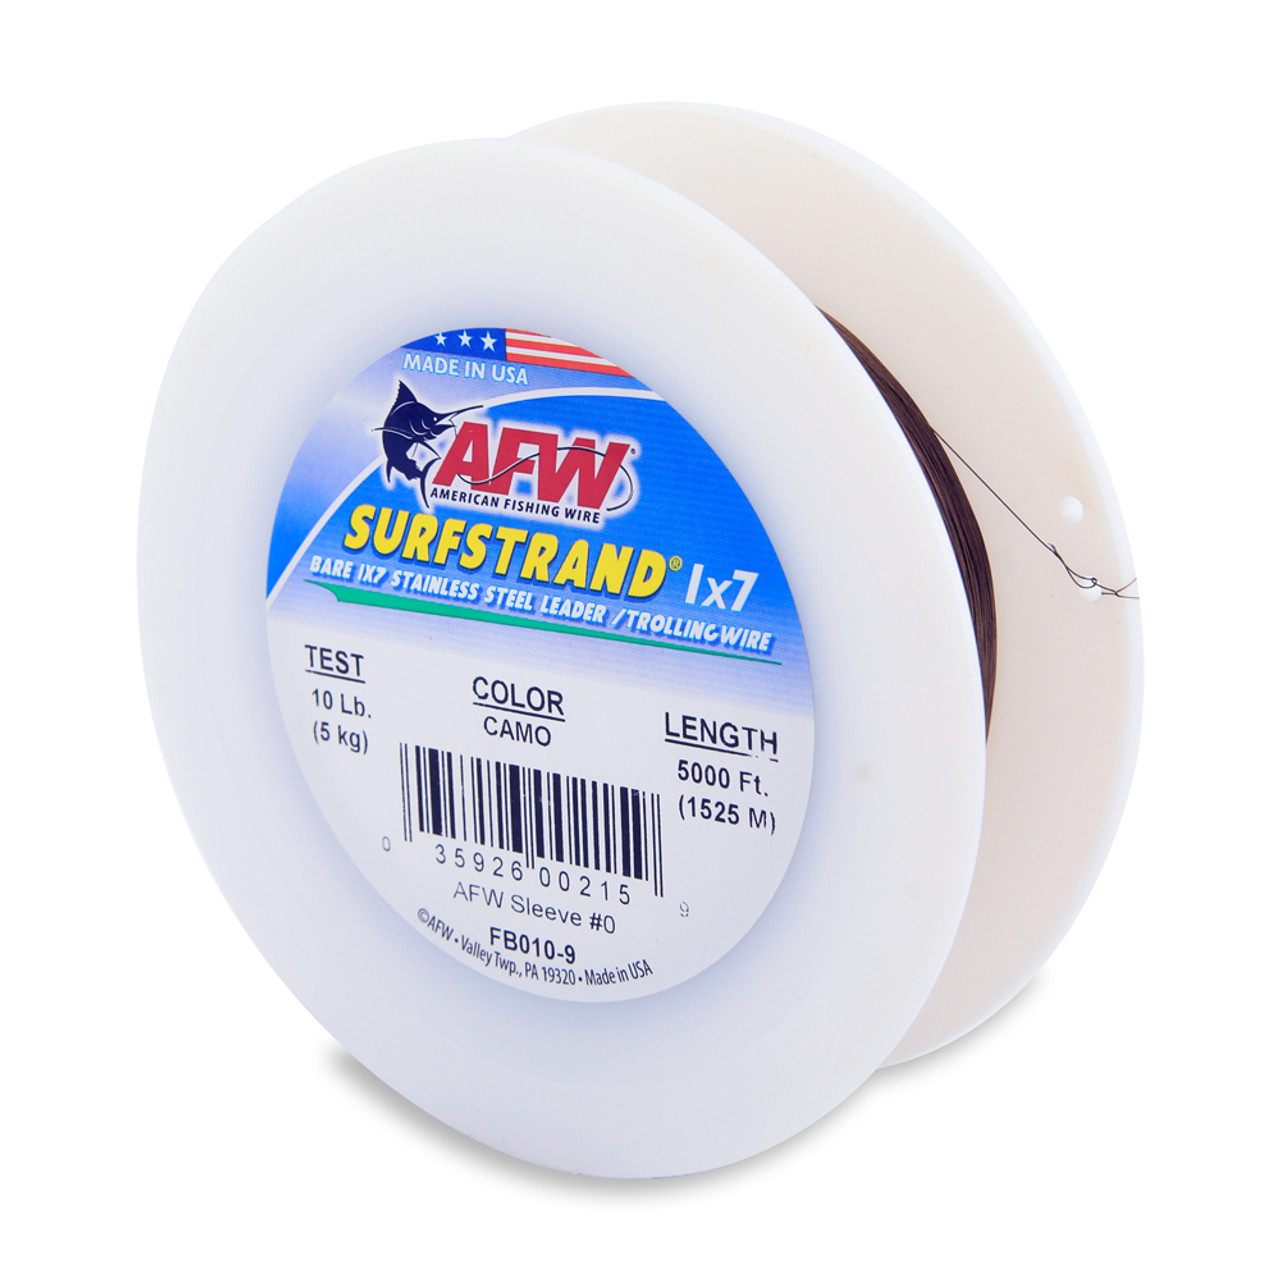 AFW - Surfstrand Bare 1x7 Stainless Steel Leader Wire - Camo - 5000 Feet 